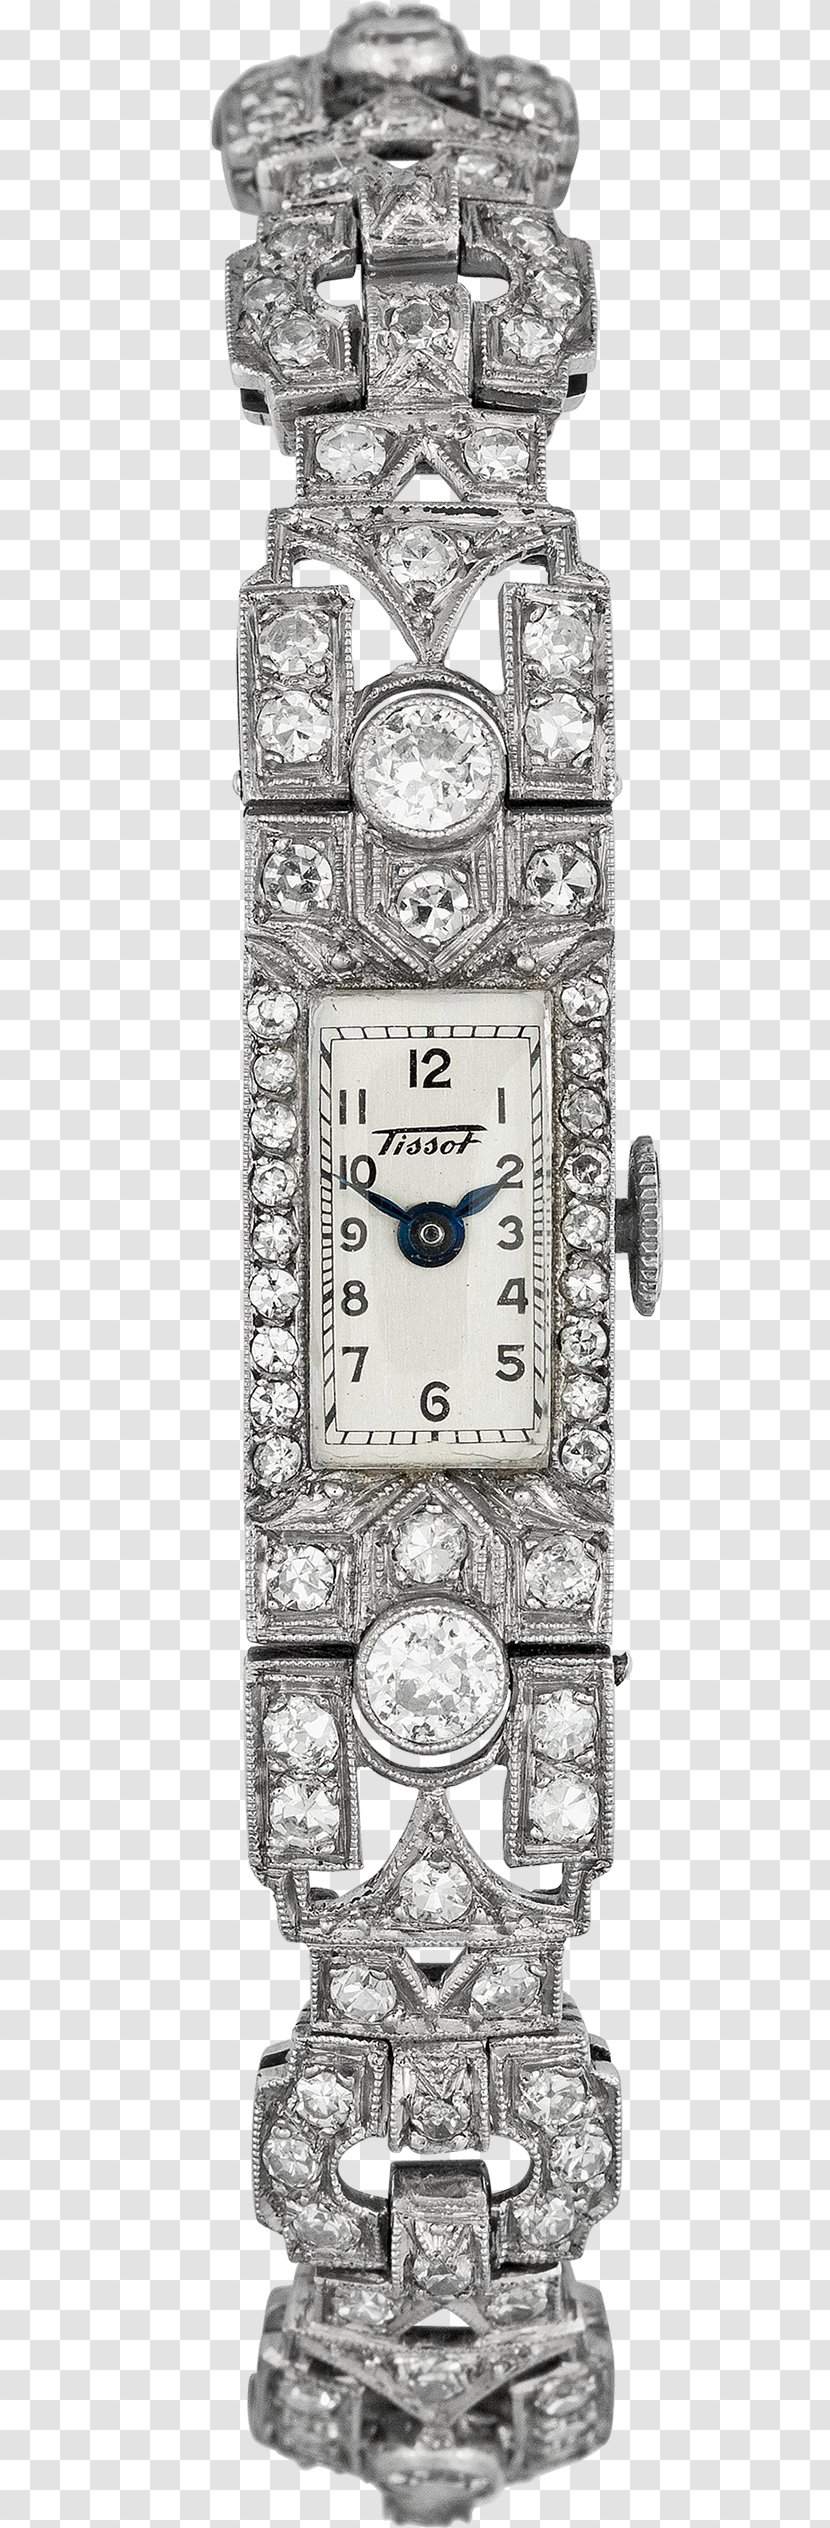 Watch Clock Tissot Luxury Goods - Silver - Watches Transparent PNG